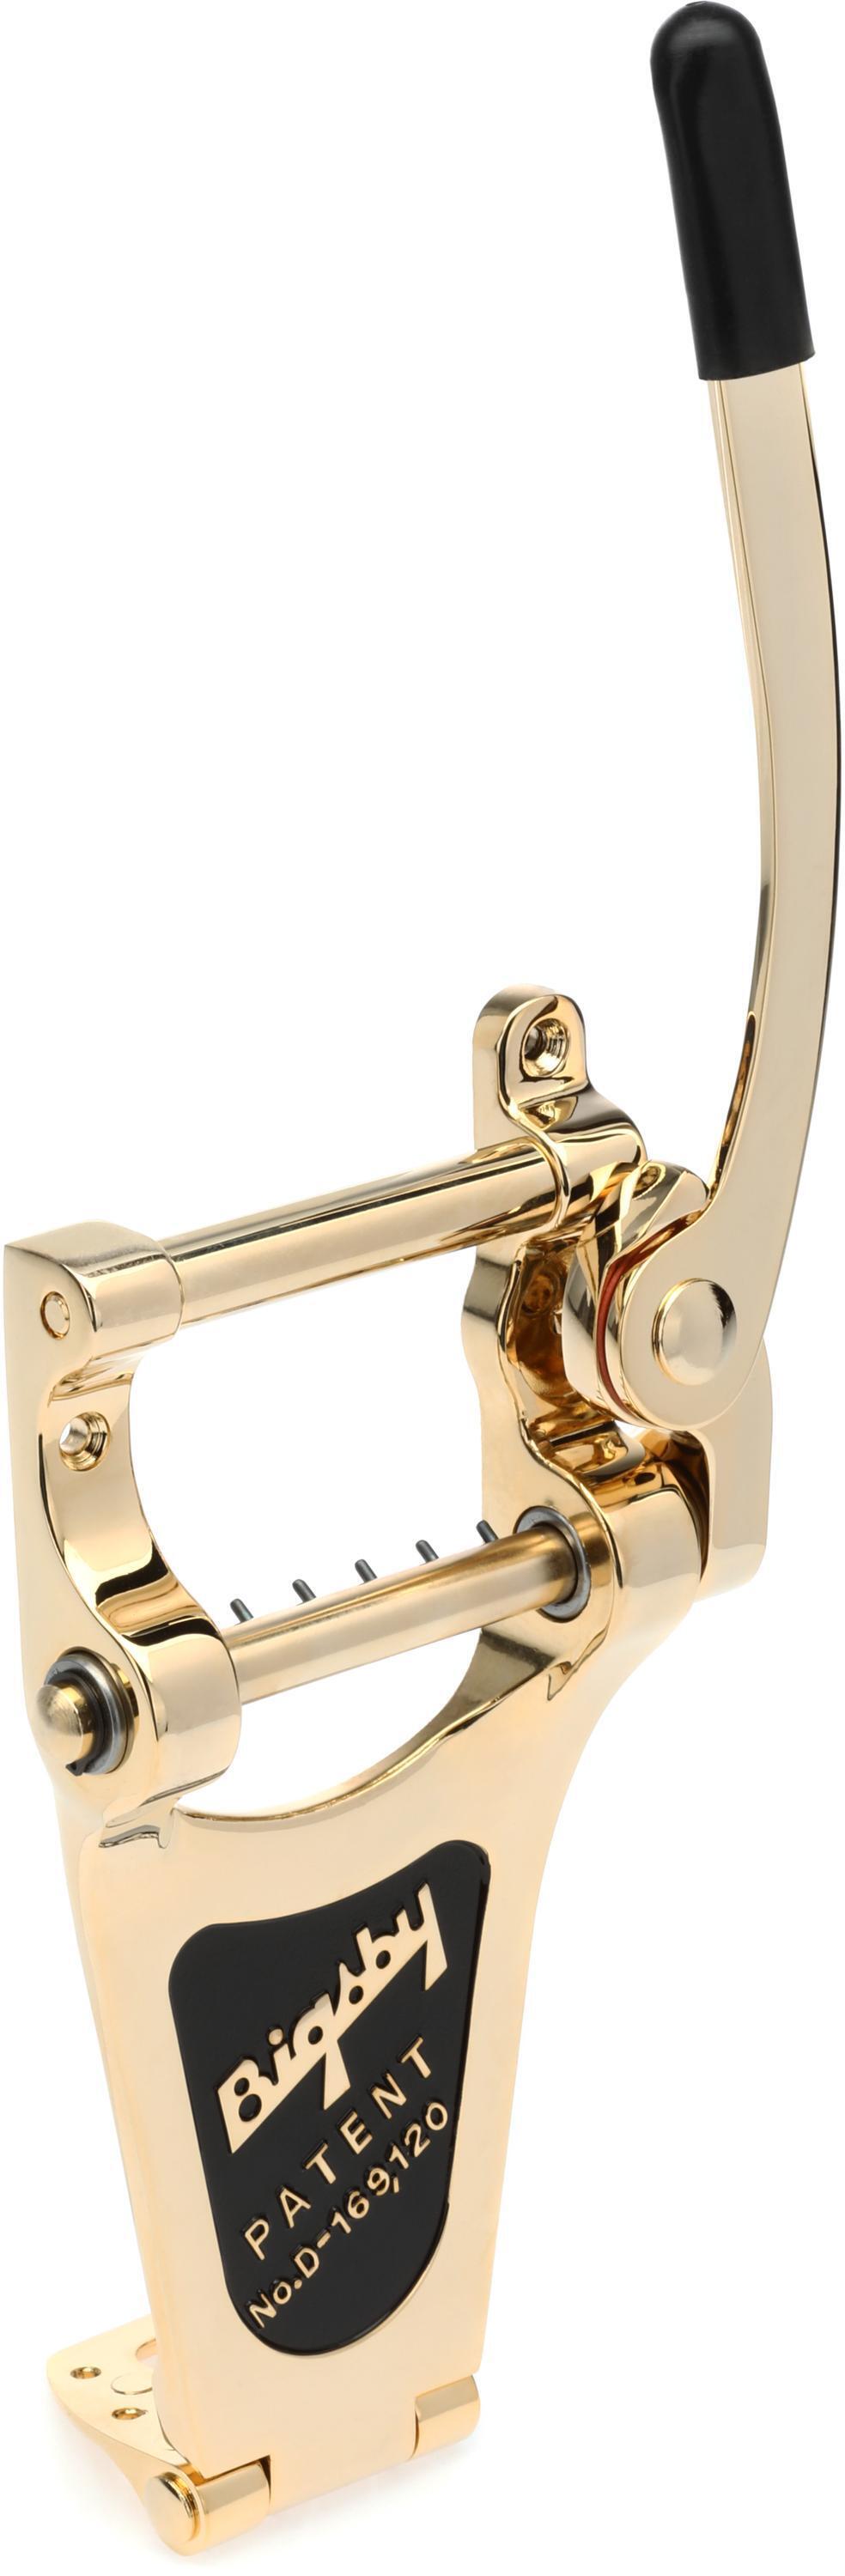 Bigsby B7 Vibrato Tailpiece for Archtop Guitars - Gold